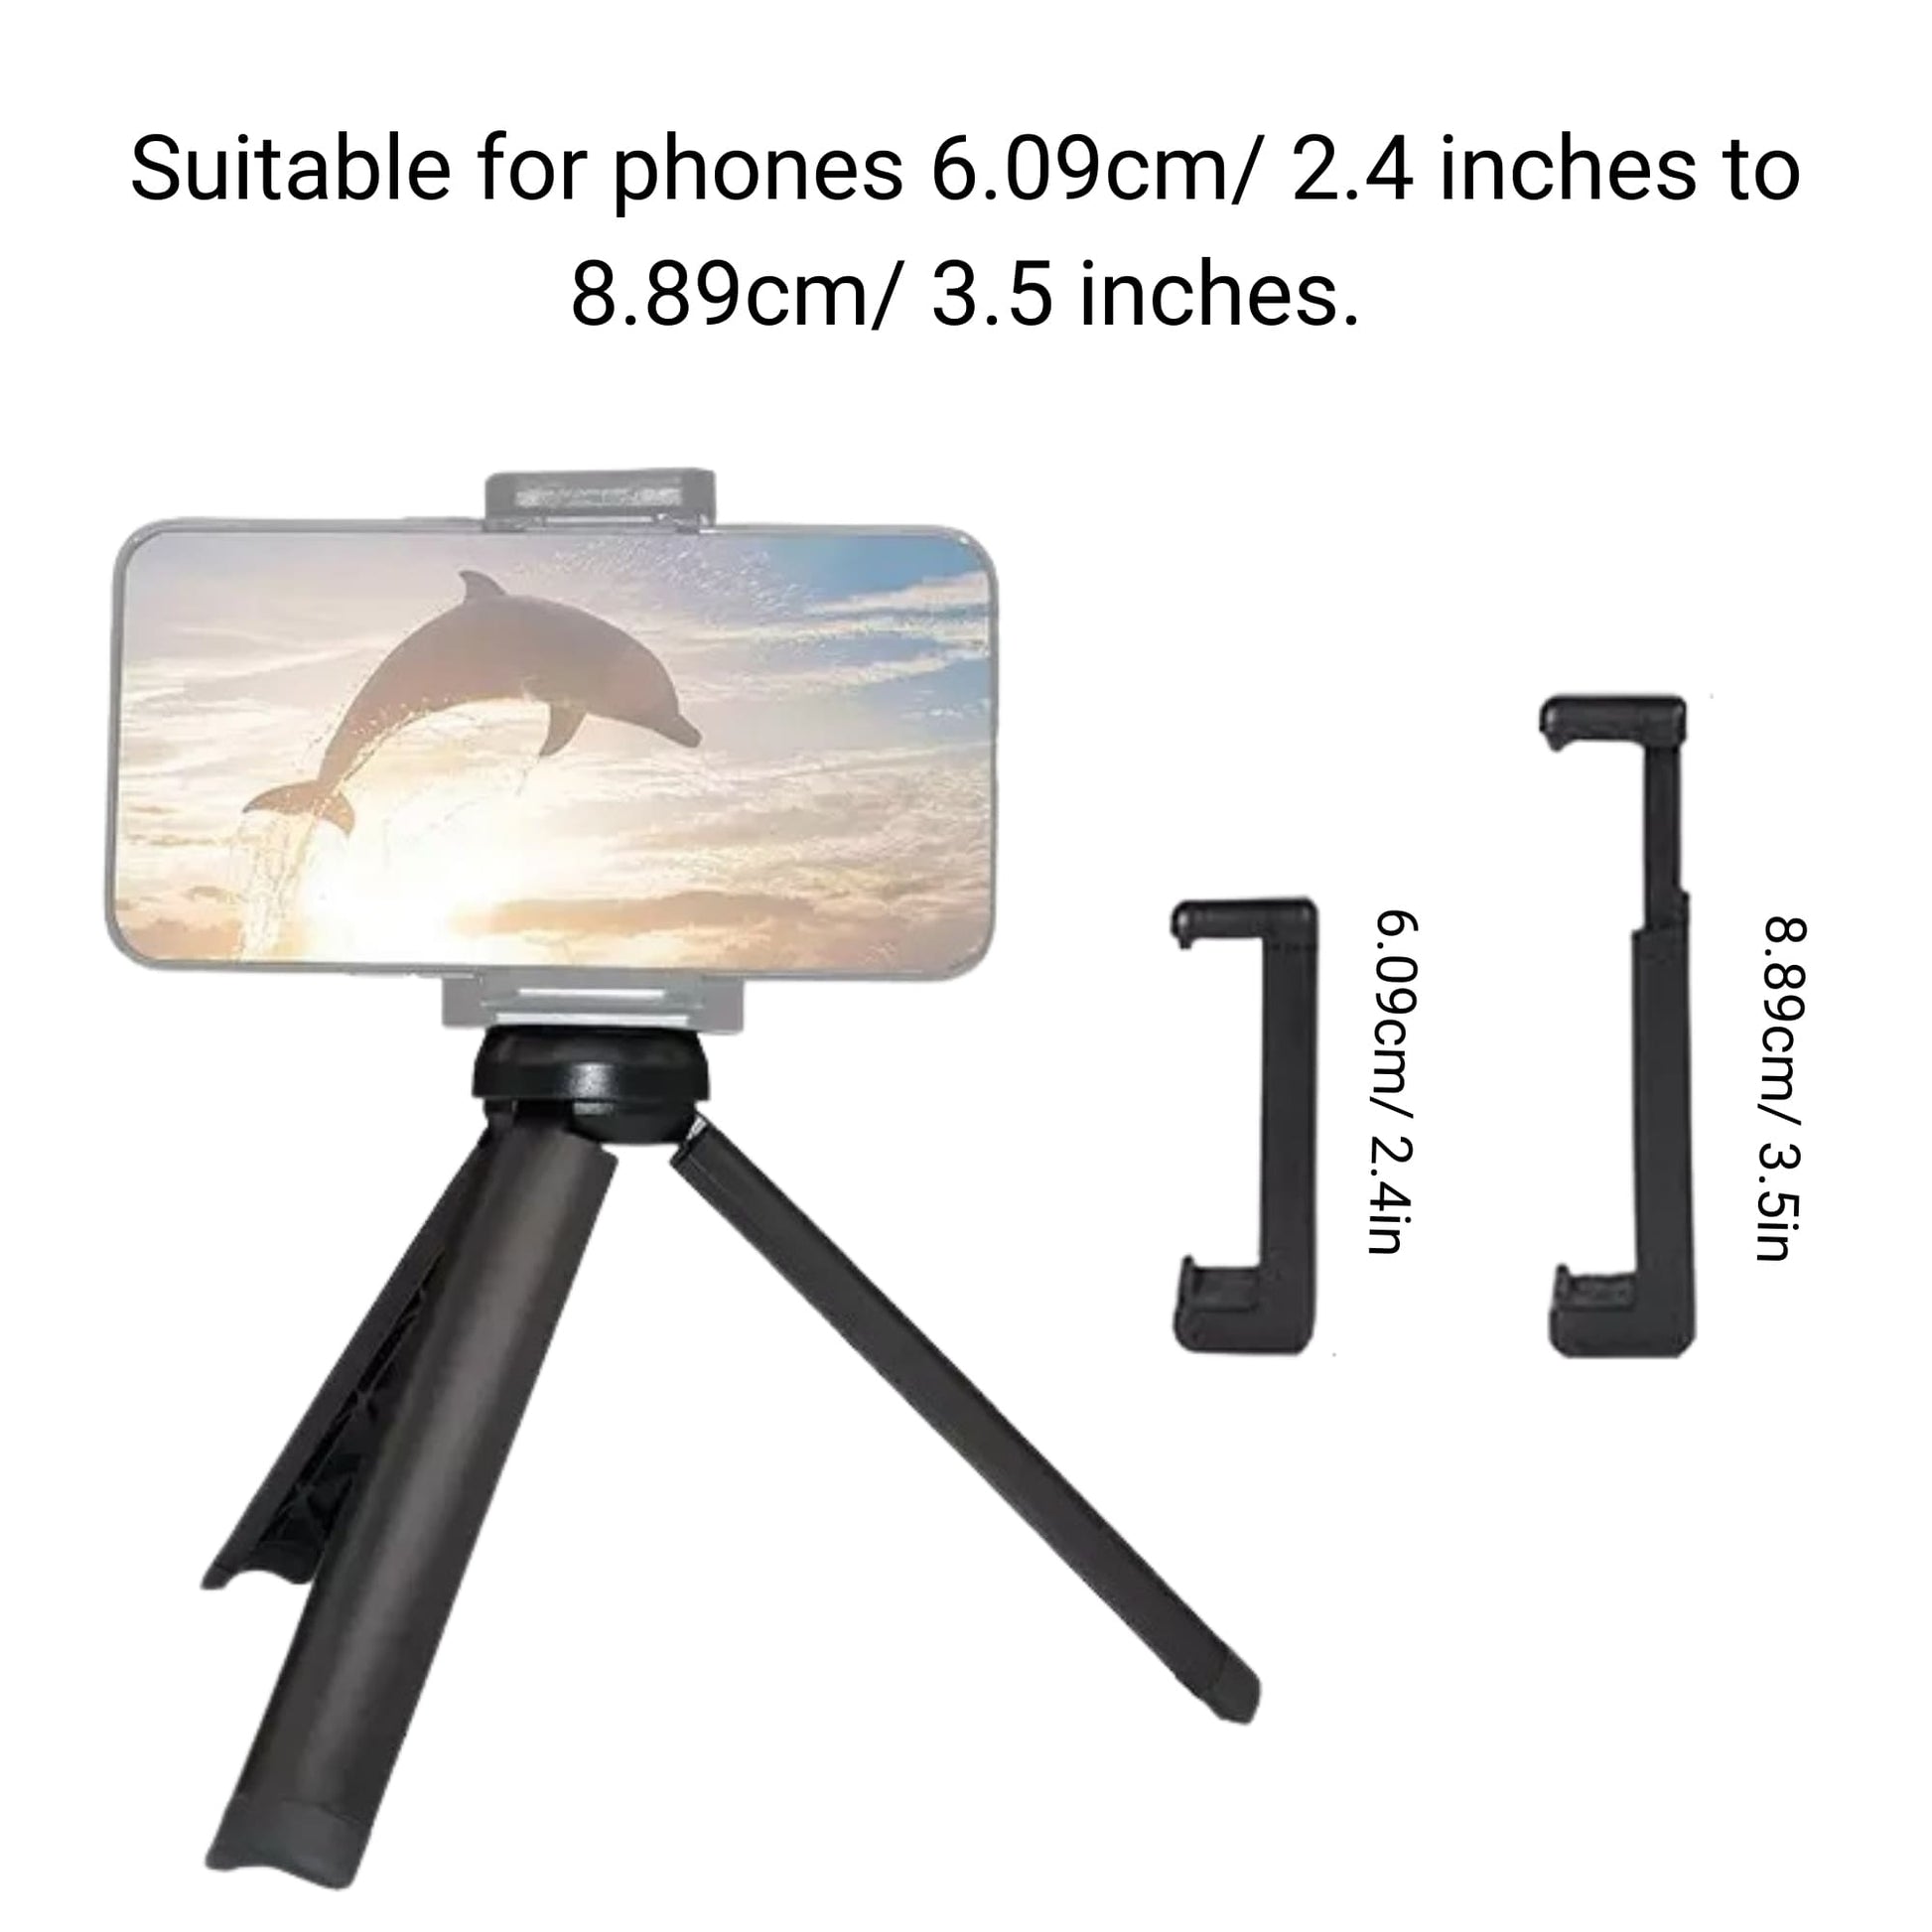 Tripod for Webcam, Portable Lightweight Mini Webcam Tripod for Smartphone  Webcam Desktop Tripod Phone Holder Table Stand 